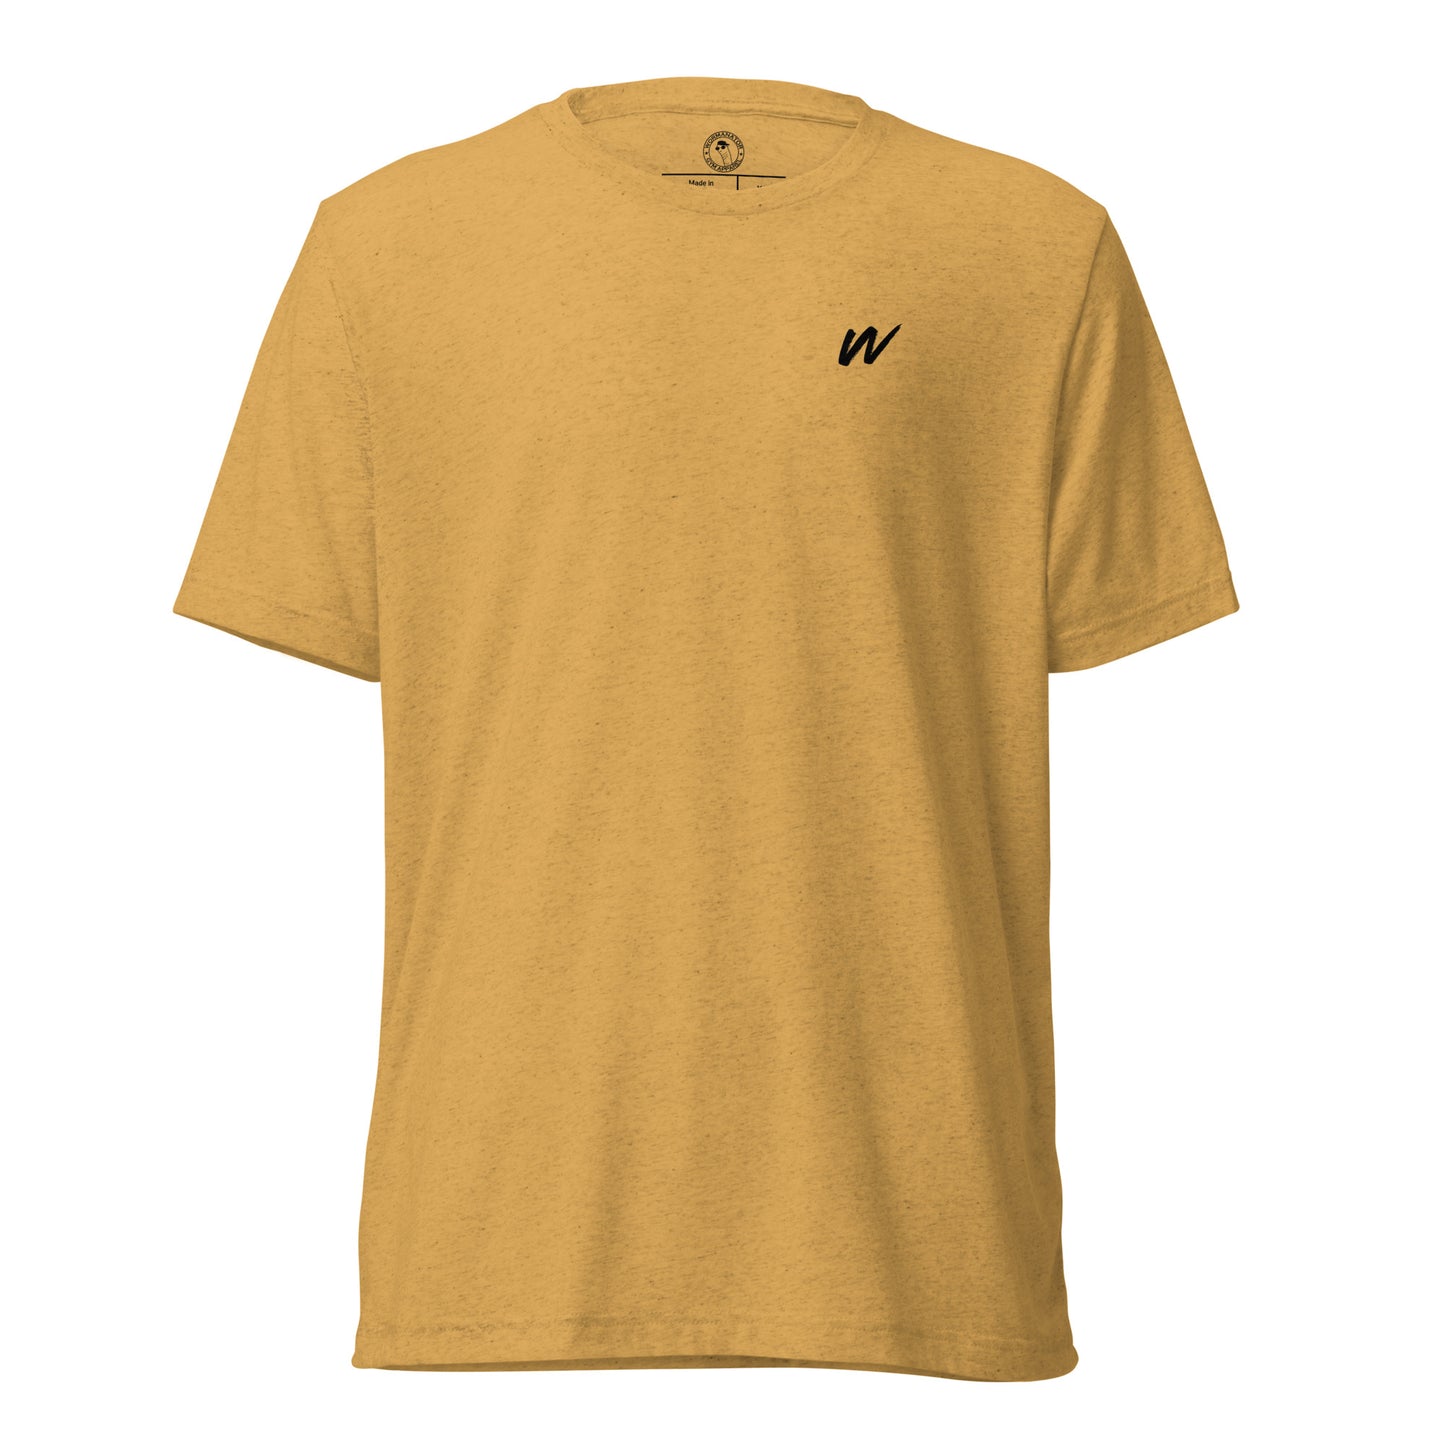 Win the Day T-Shirt in Mustard Triblend